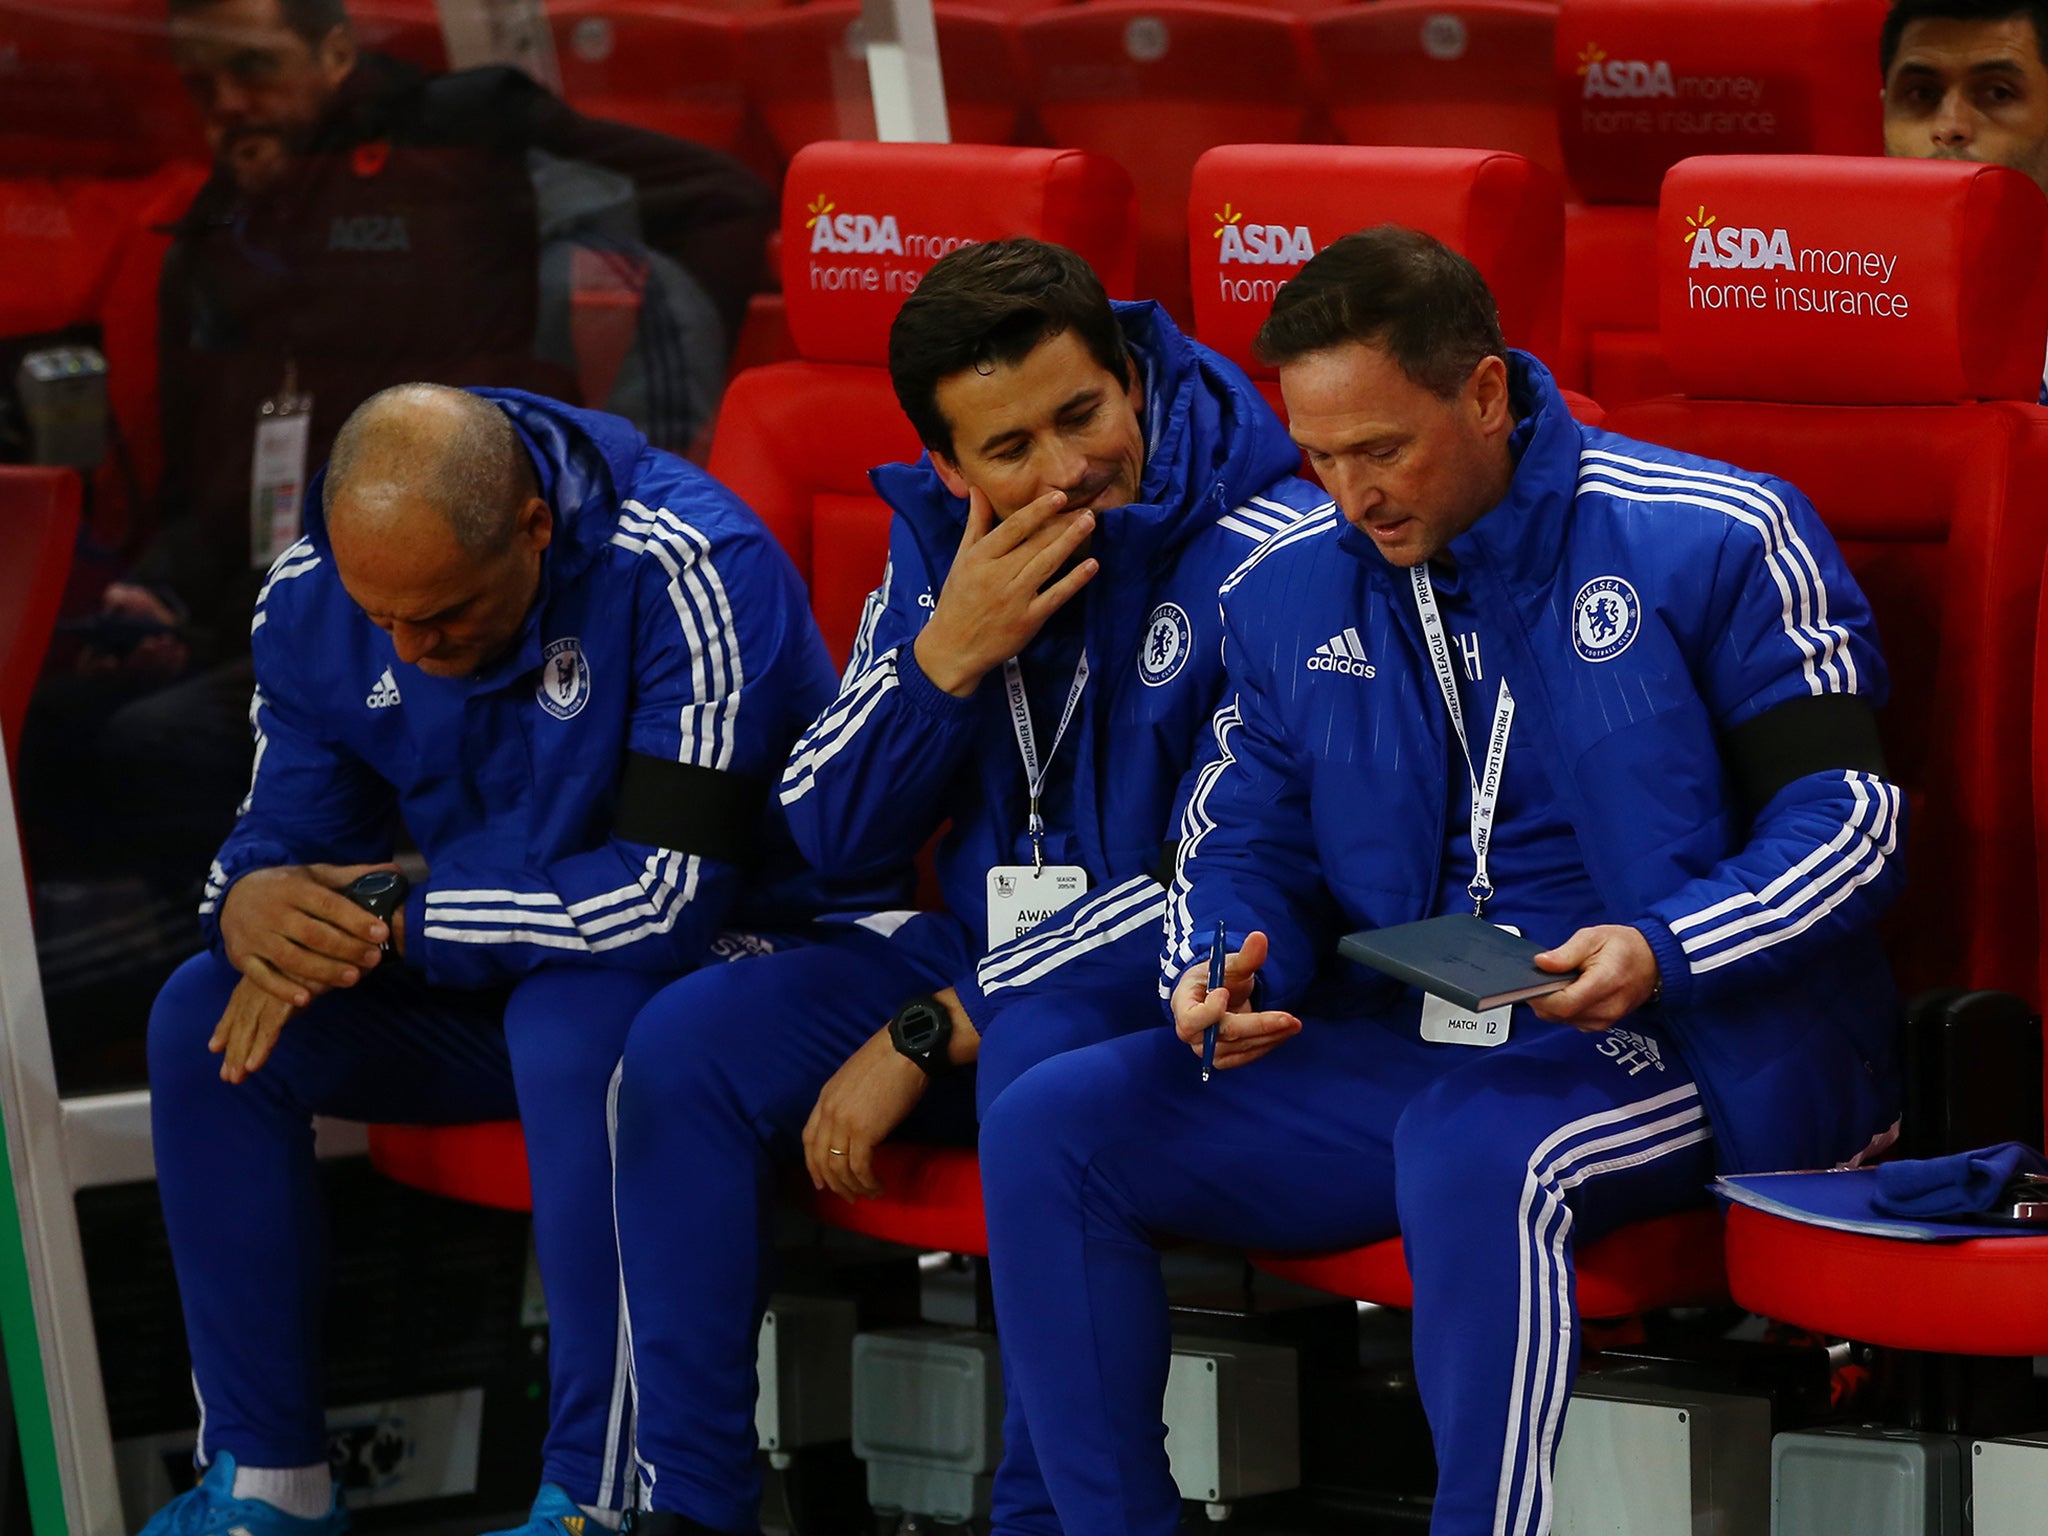 Chelsea first team assistant coaches Silvino Louro, Rui Faria and Steve Holland on the bench